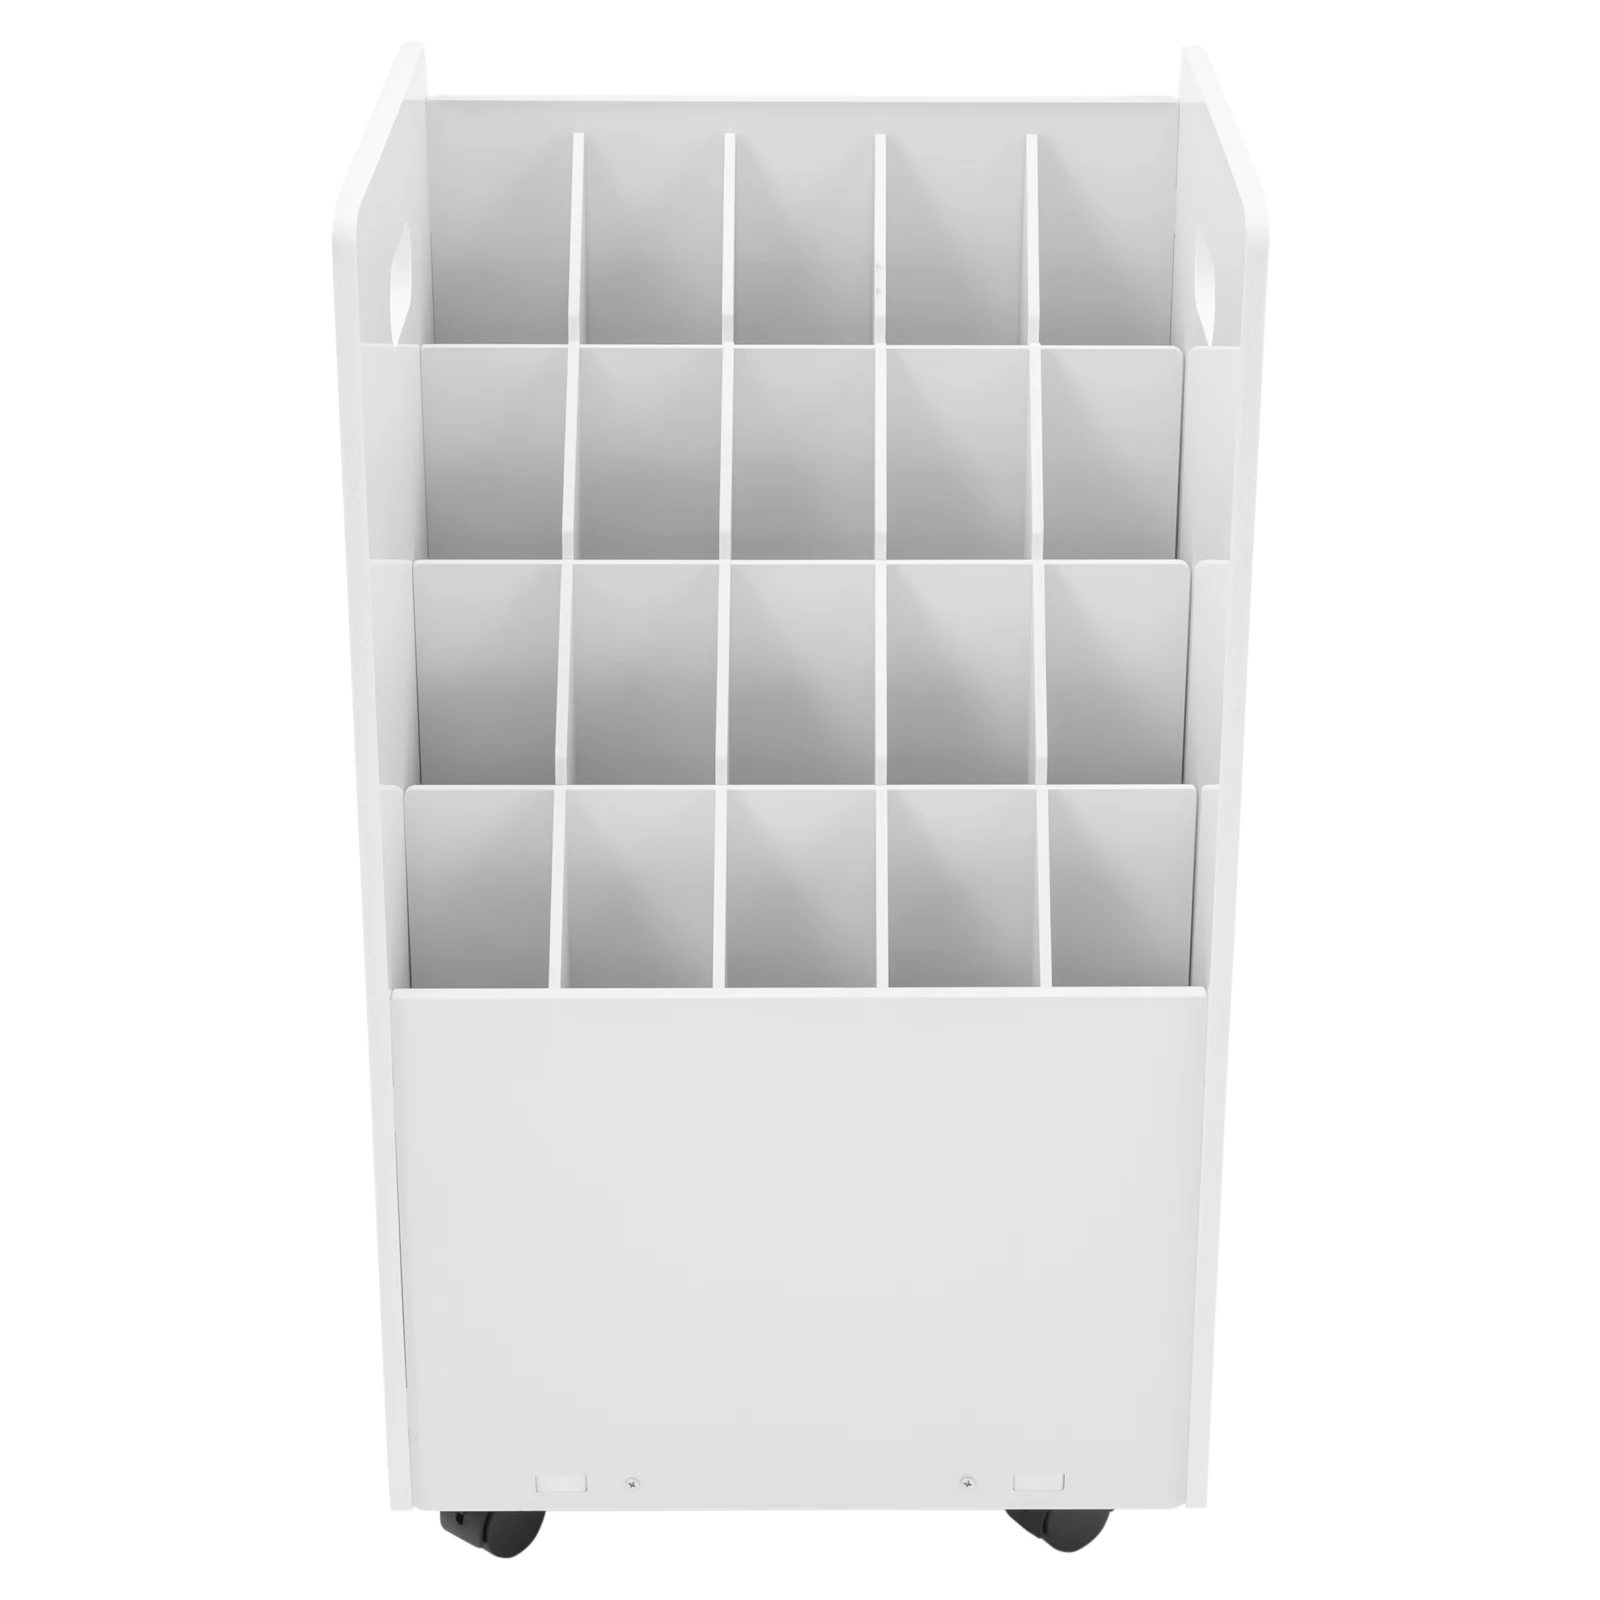 

20-slot Roll File Organizer with 4 Wheels(All With Brakes) Each Slot Size 6.8*7.15cm for Study Rooms, Studios, Offices